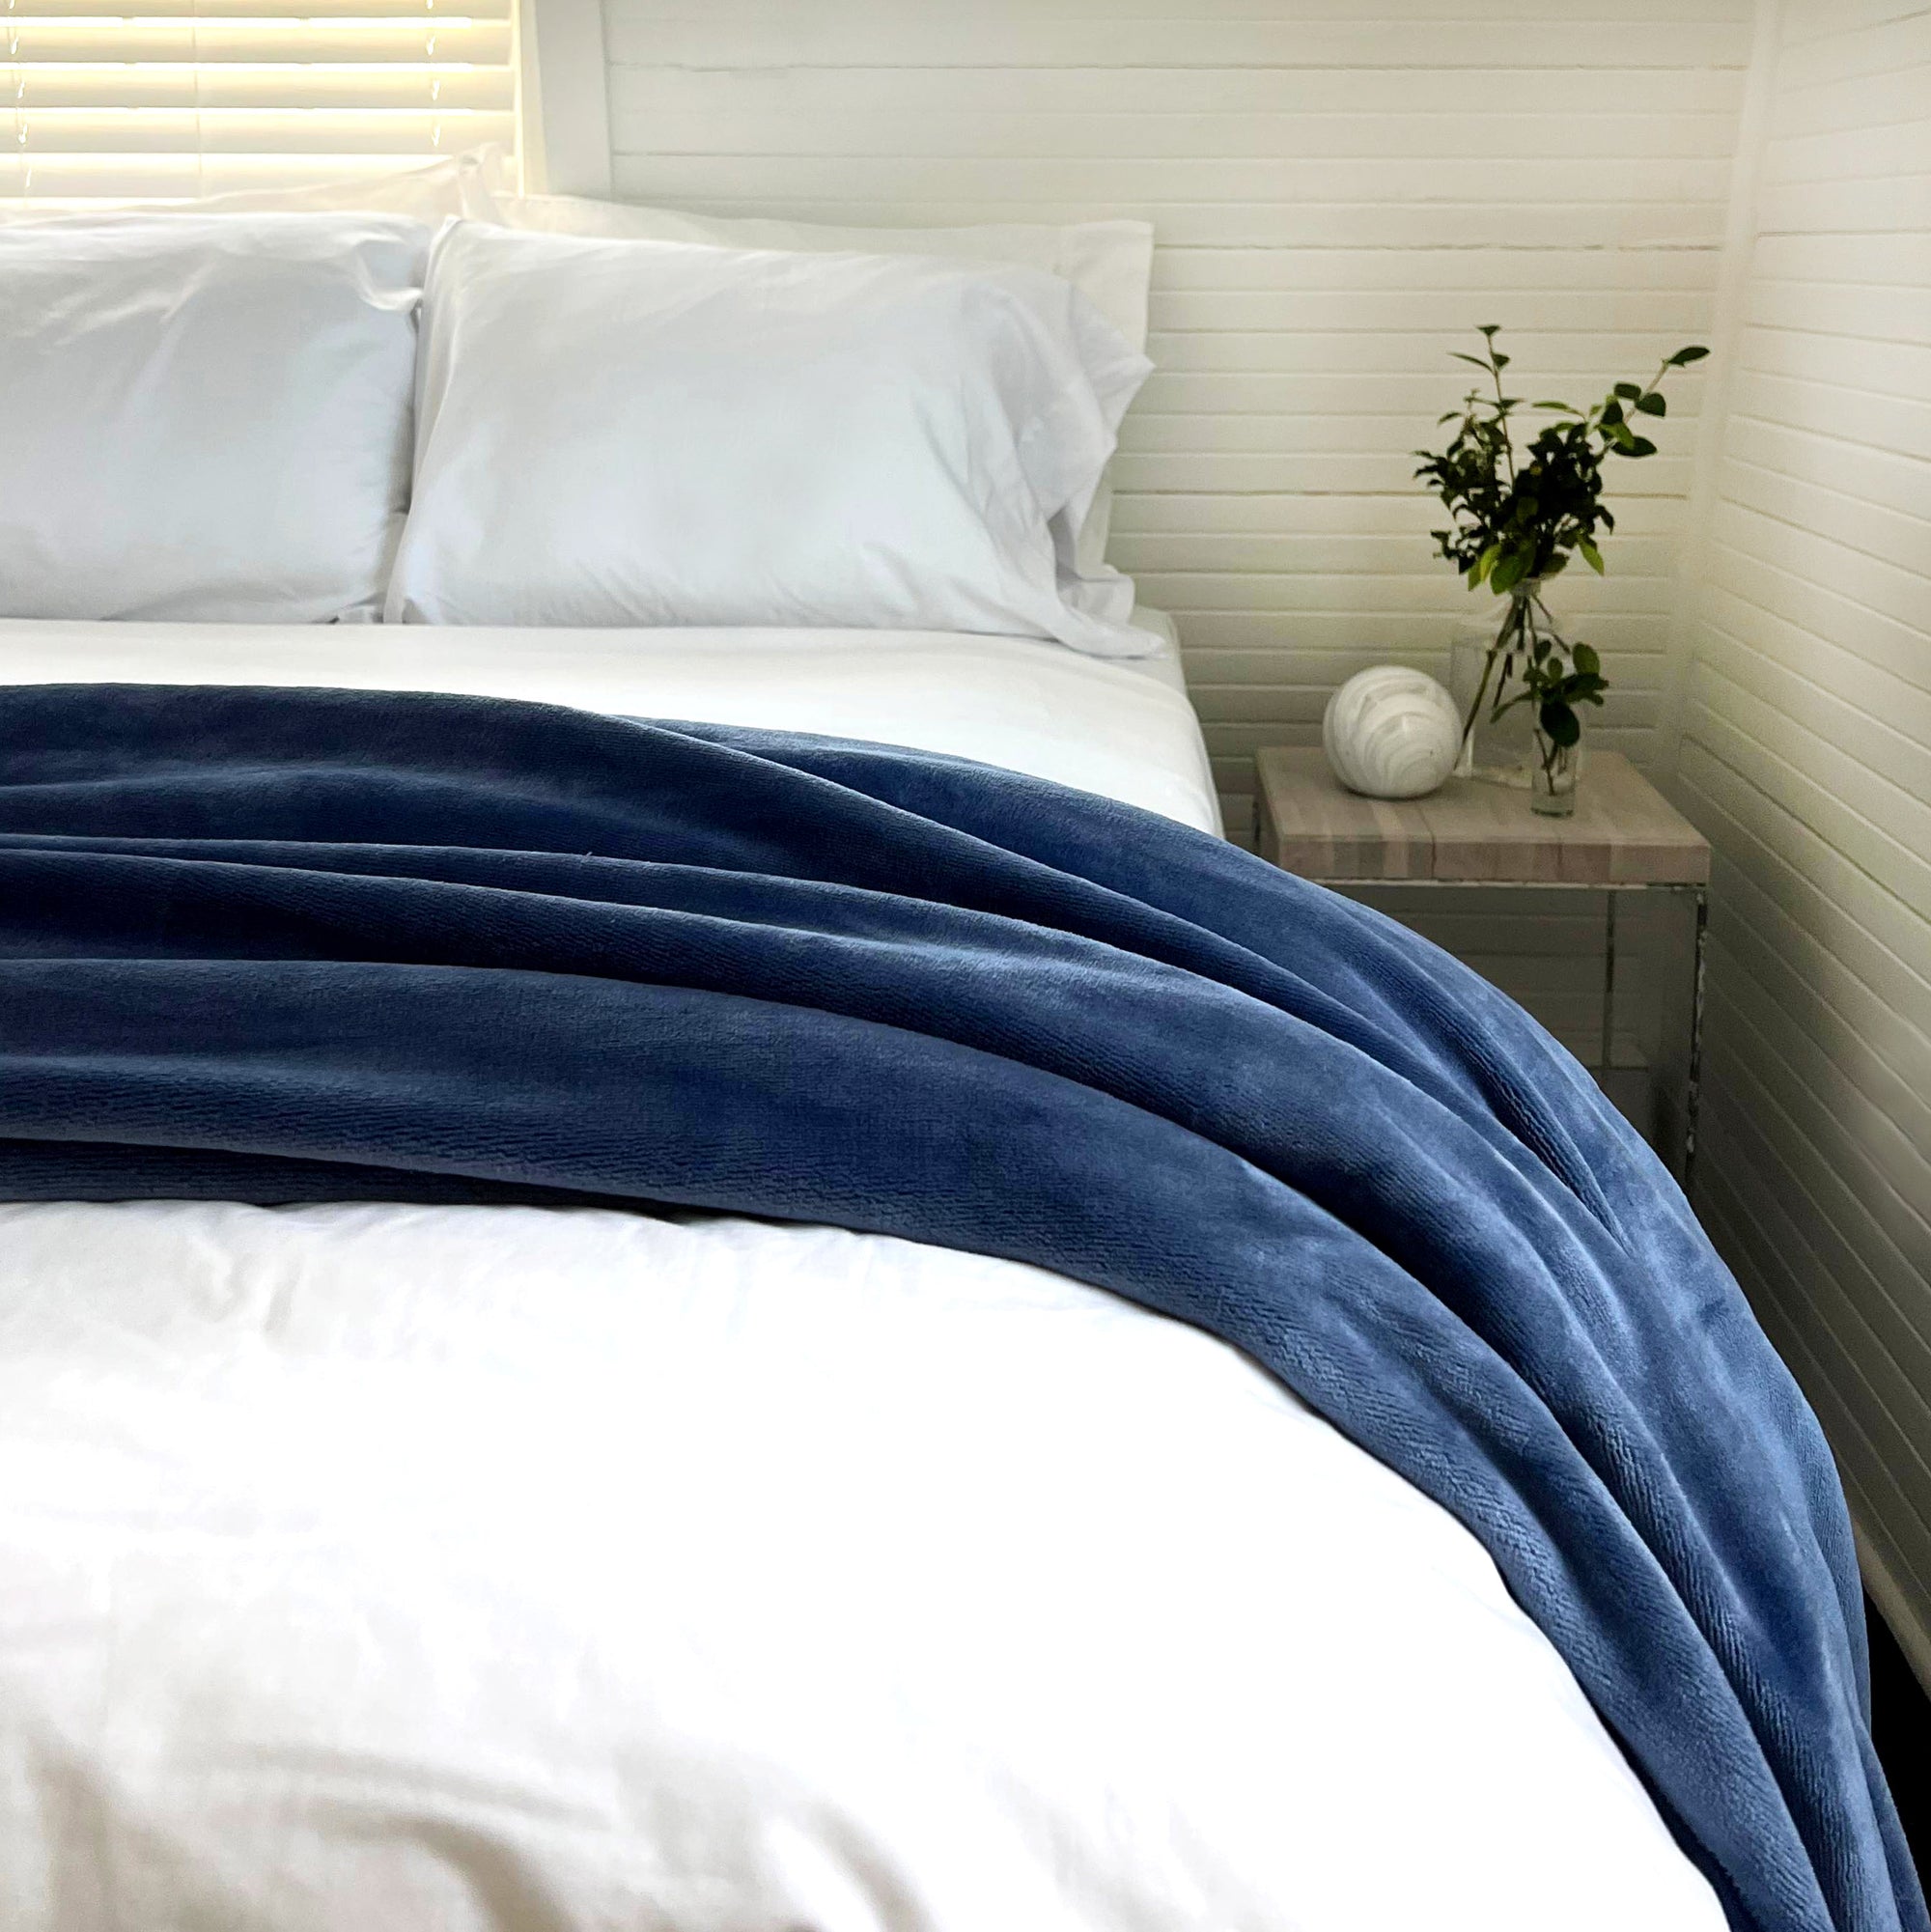 How to Size Blankets for Your Bed - American Blanket Company